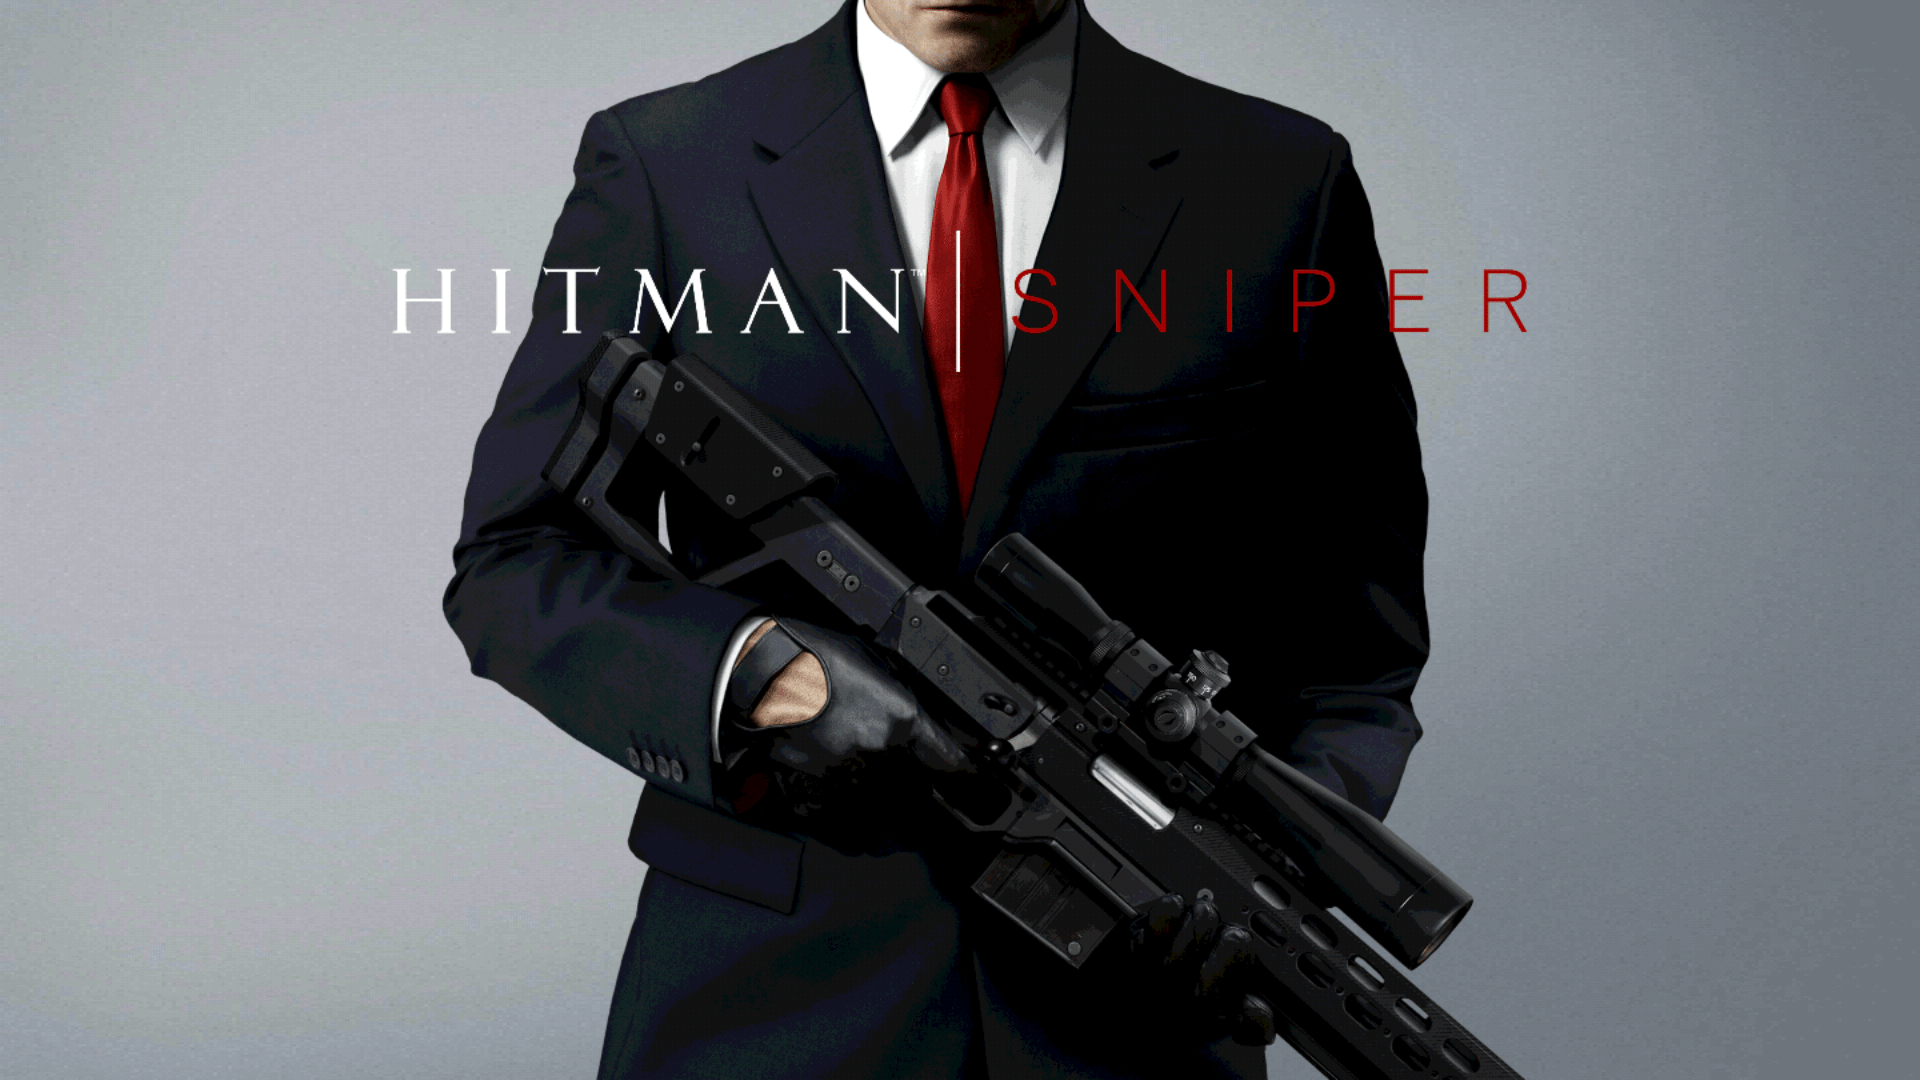 Download Hitman wallpapers for mobile phone free Hitman HD pictures